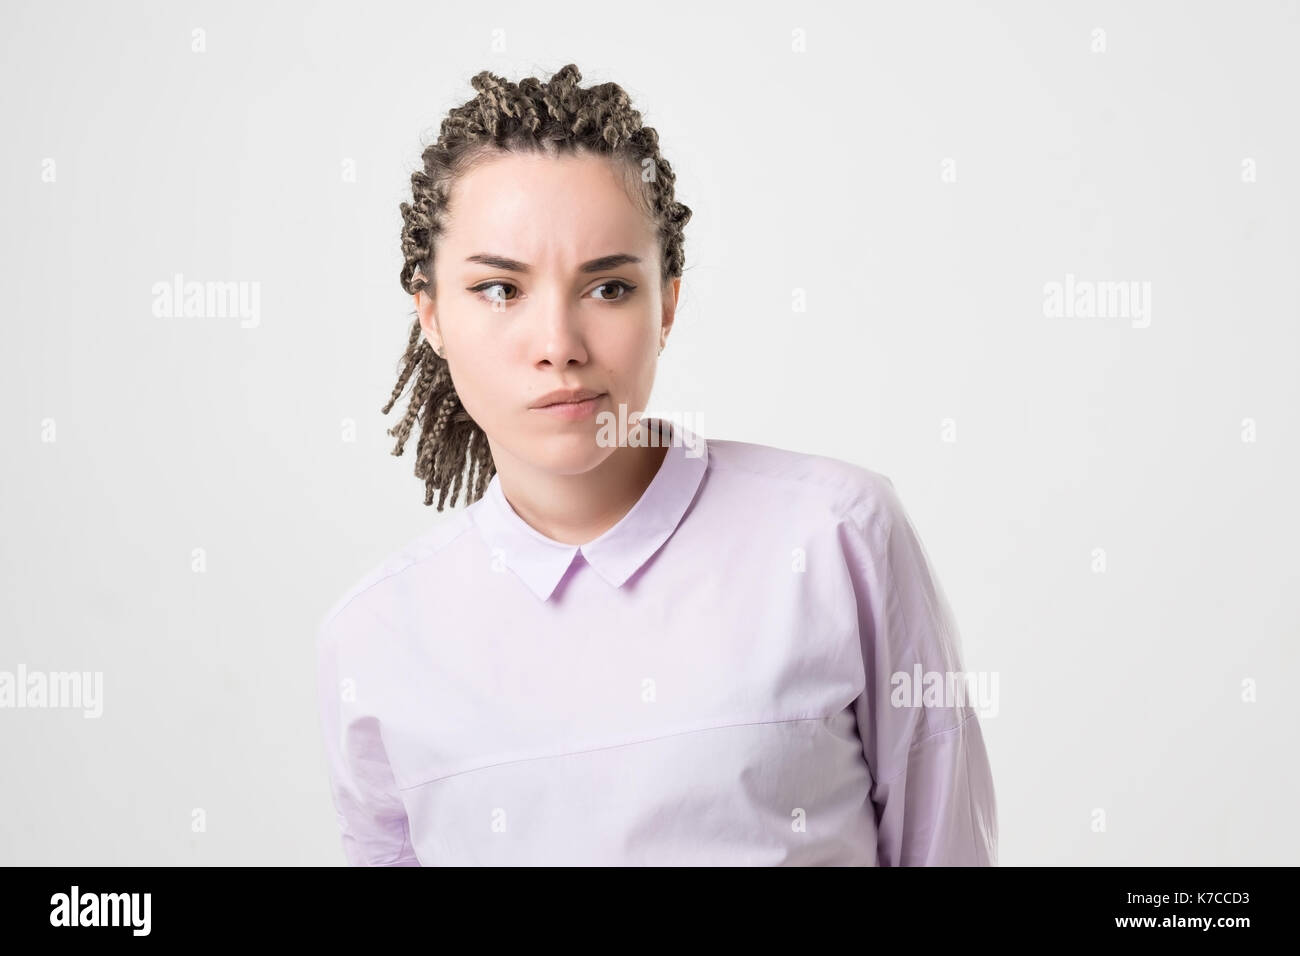 Pensive doubtful caucasian girl with braids looking sideways, feeling unsure. She making an important decision Stock Photo